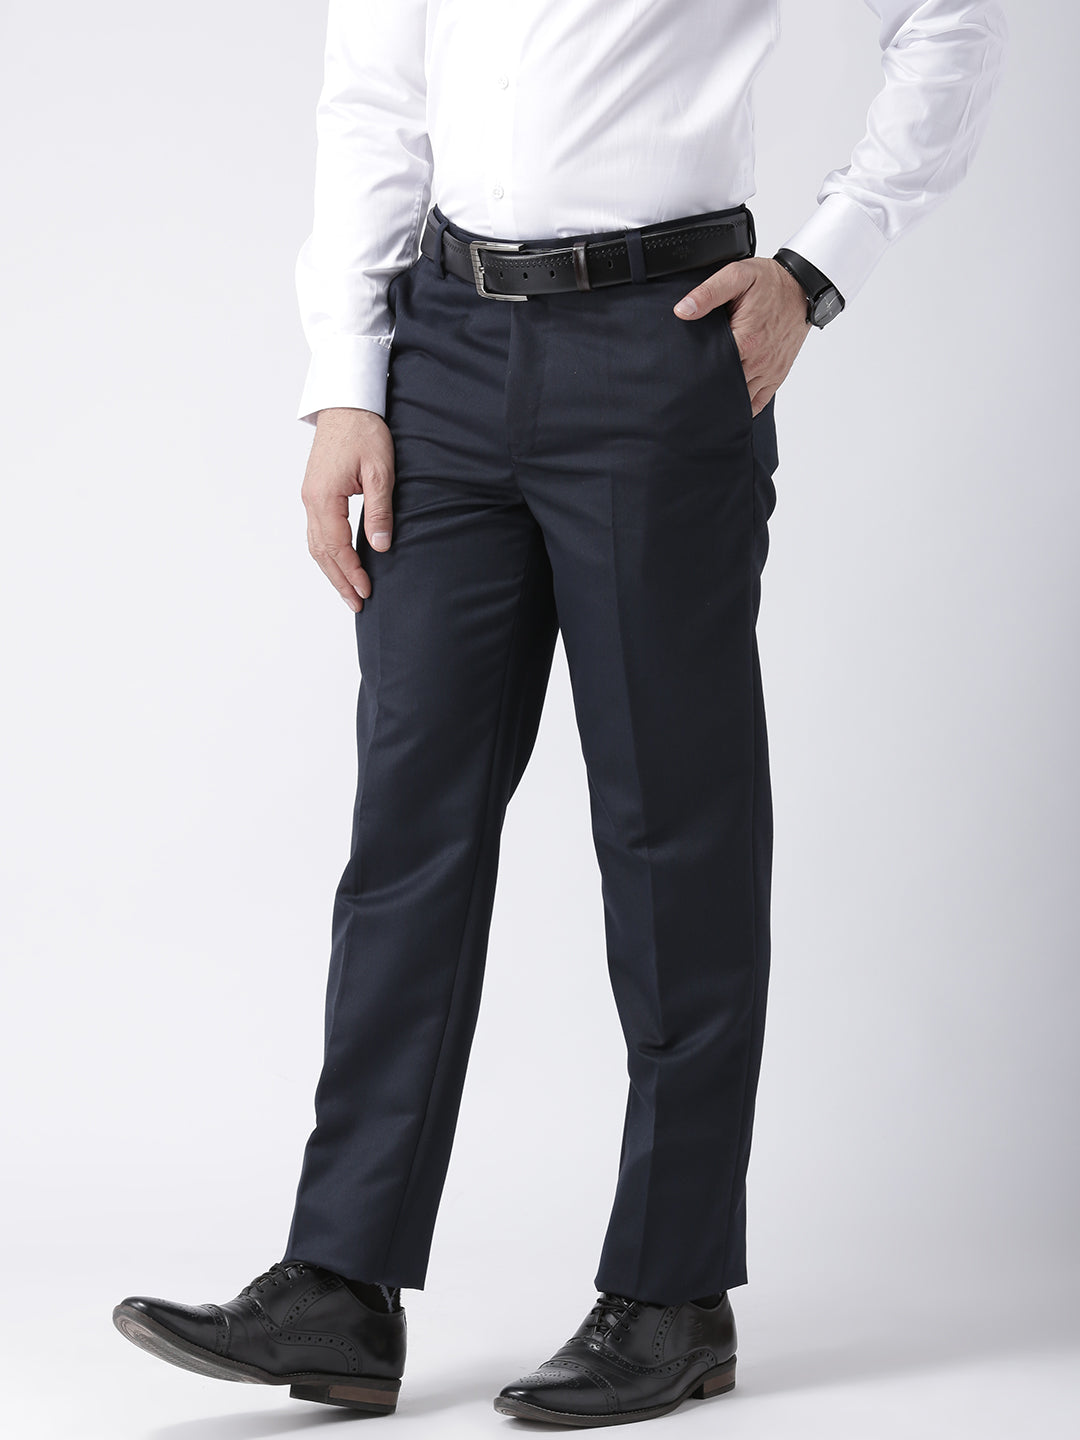 Buy Regular Fit Men Trousers Gray and Blue Combo of 2 Polyester Blend for  Best Price, Reviews, Free Shipping